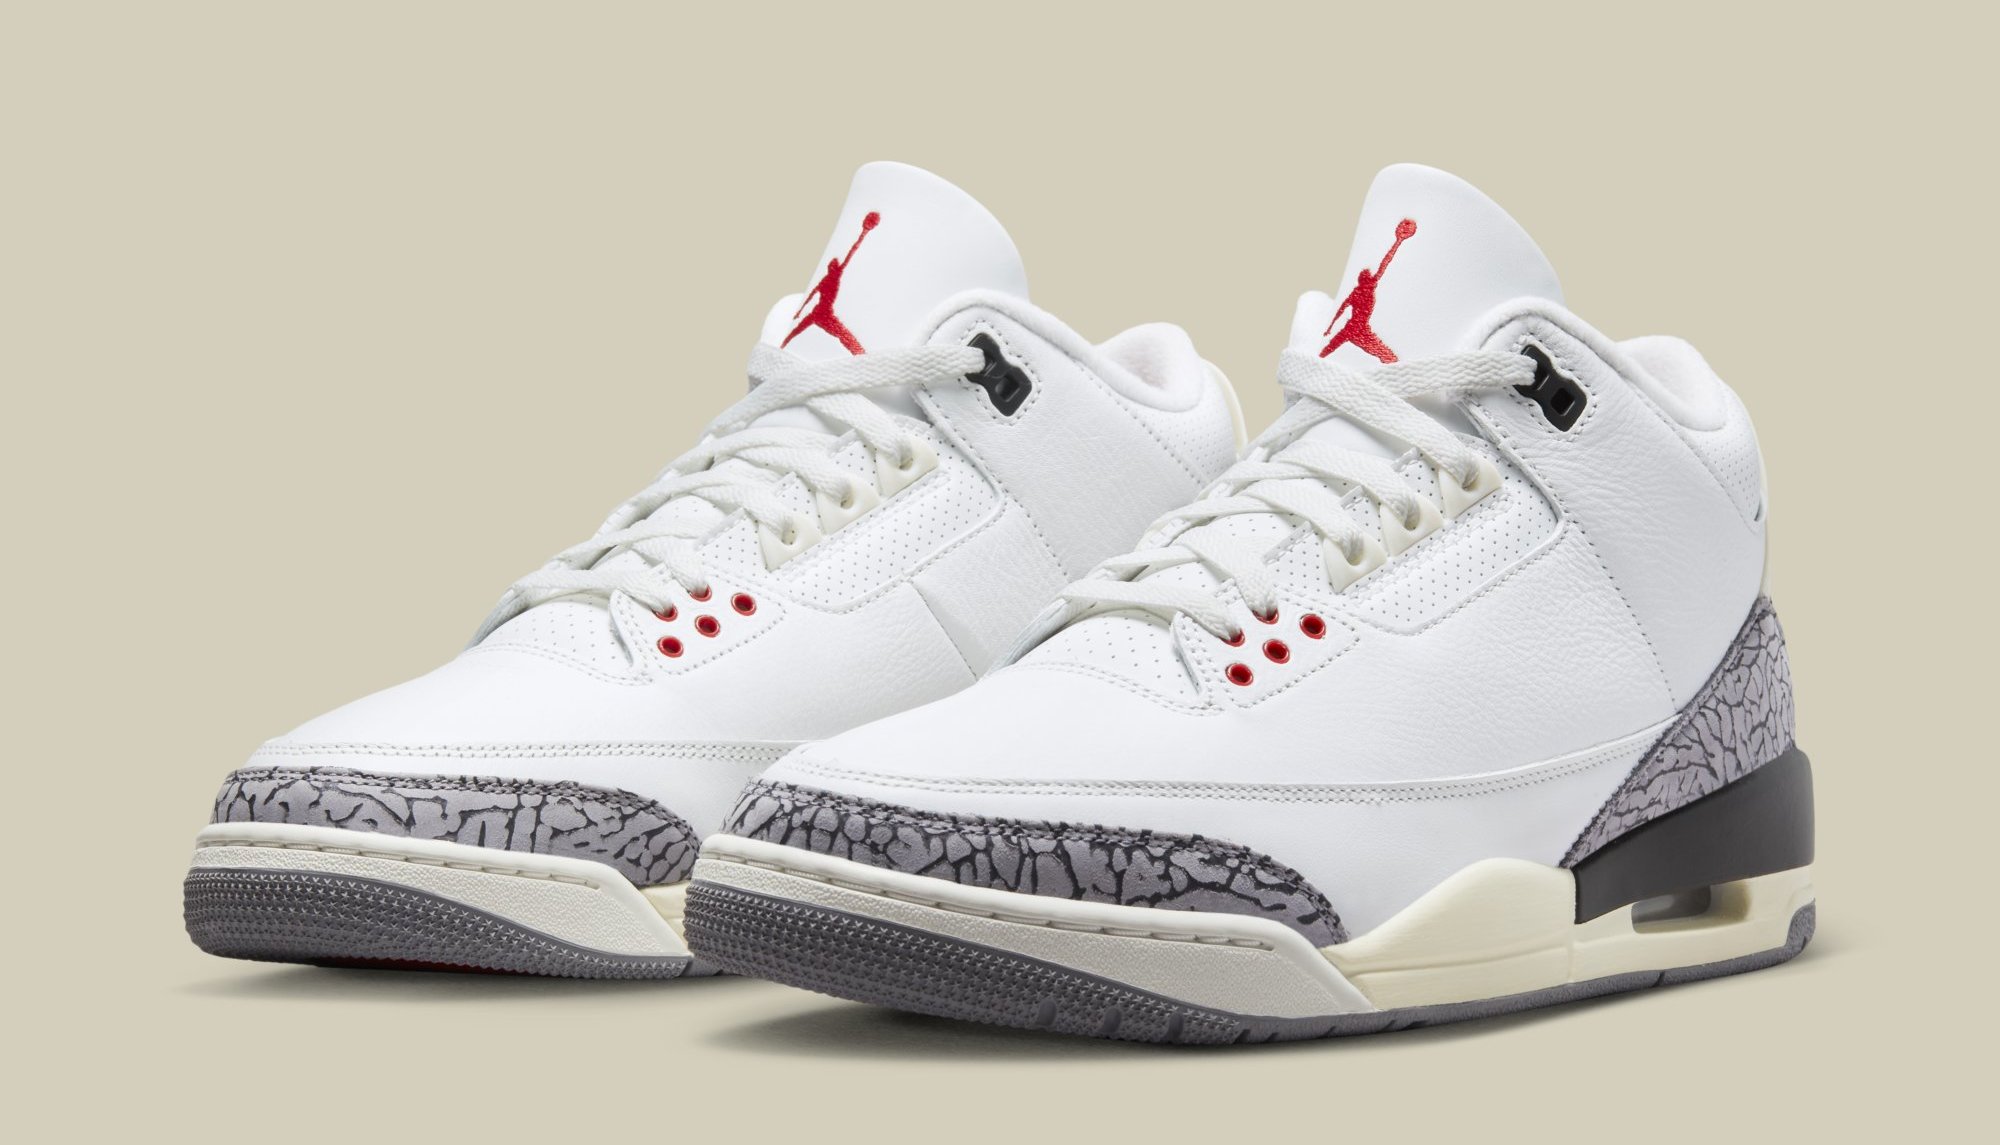 White Cement Reimagined' Air Jordan 3 Releases in March | Complex